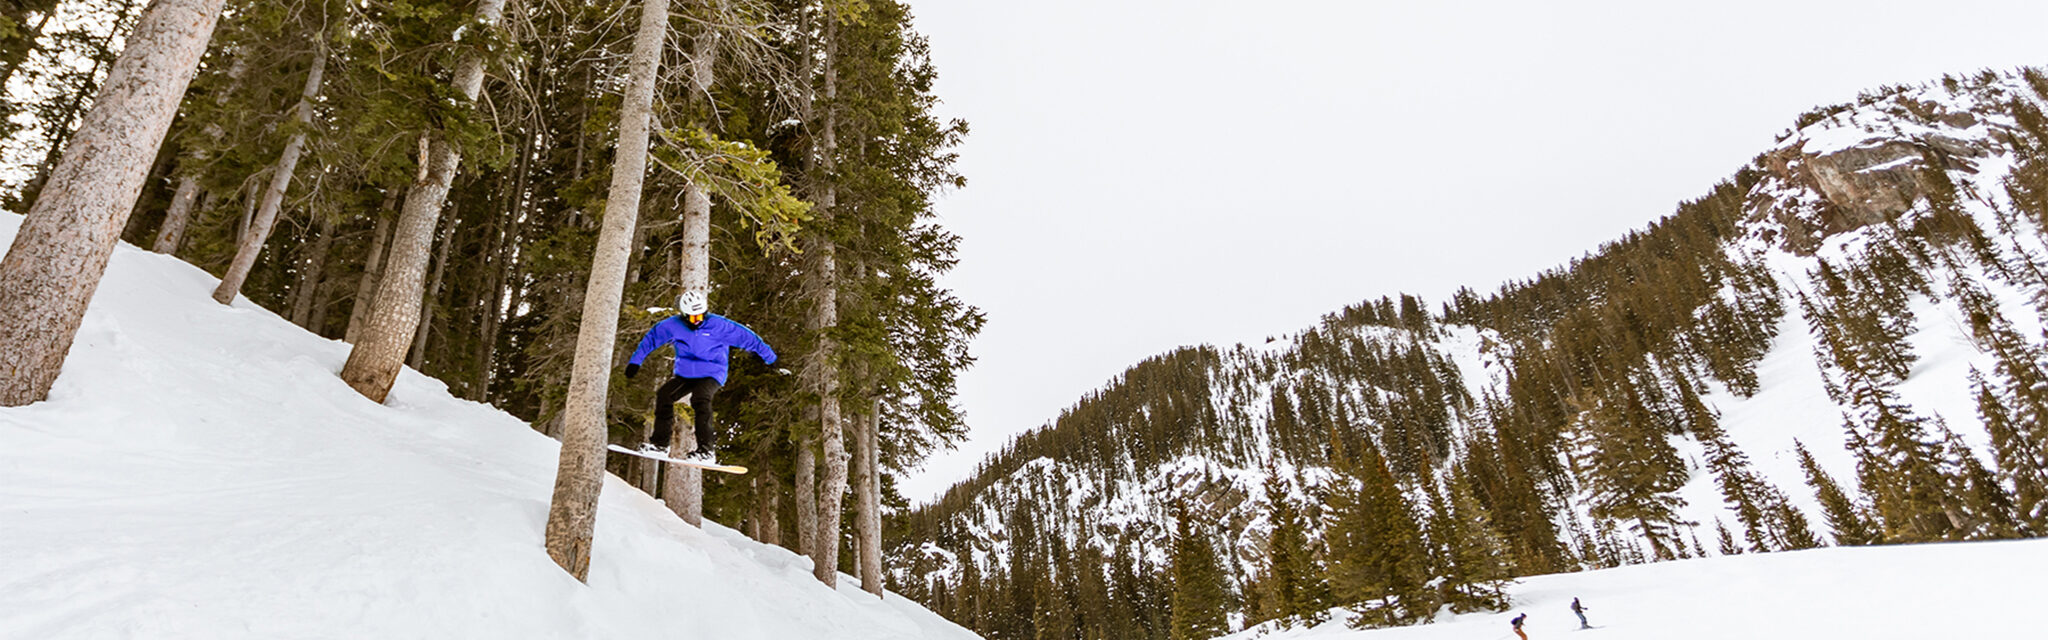 A snowboarder catches air coming out of the trees